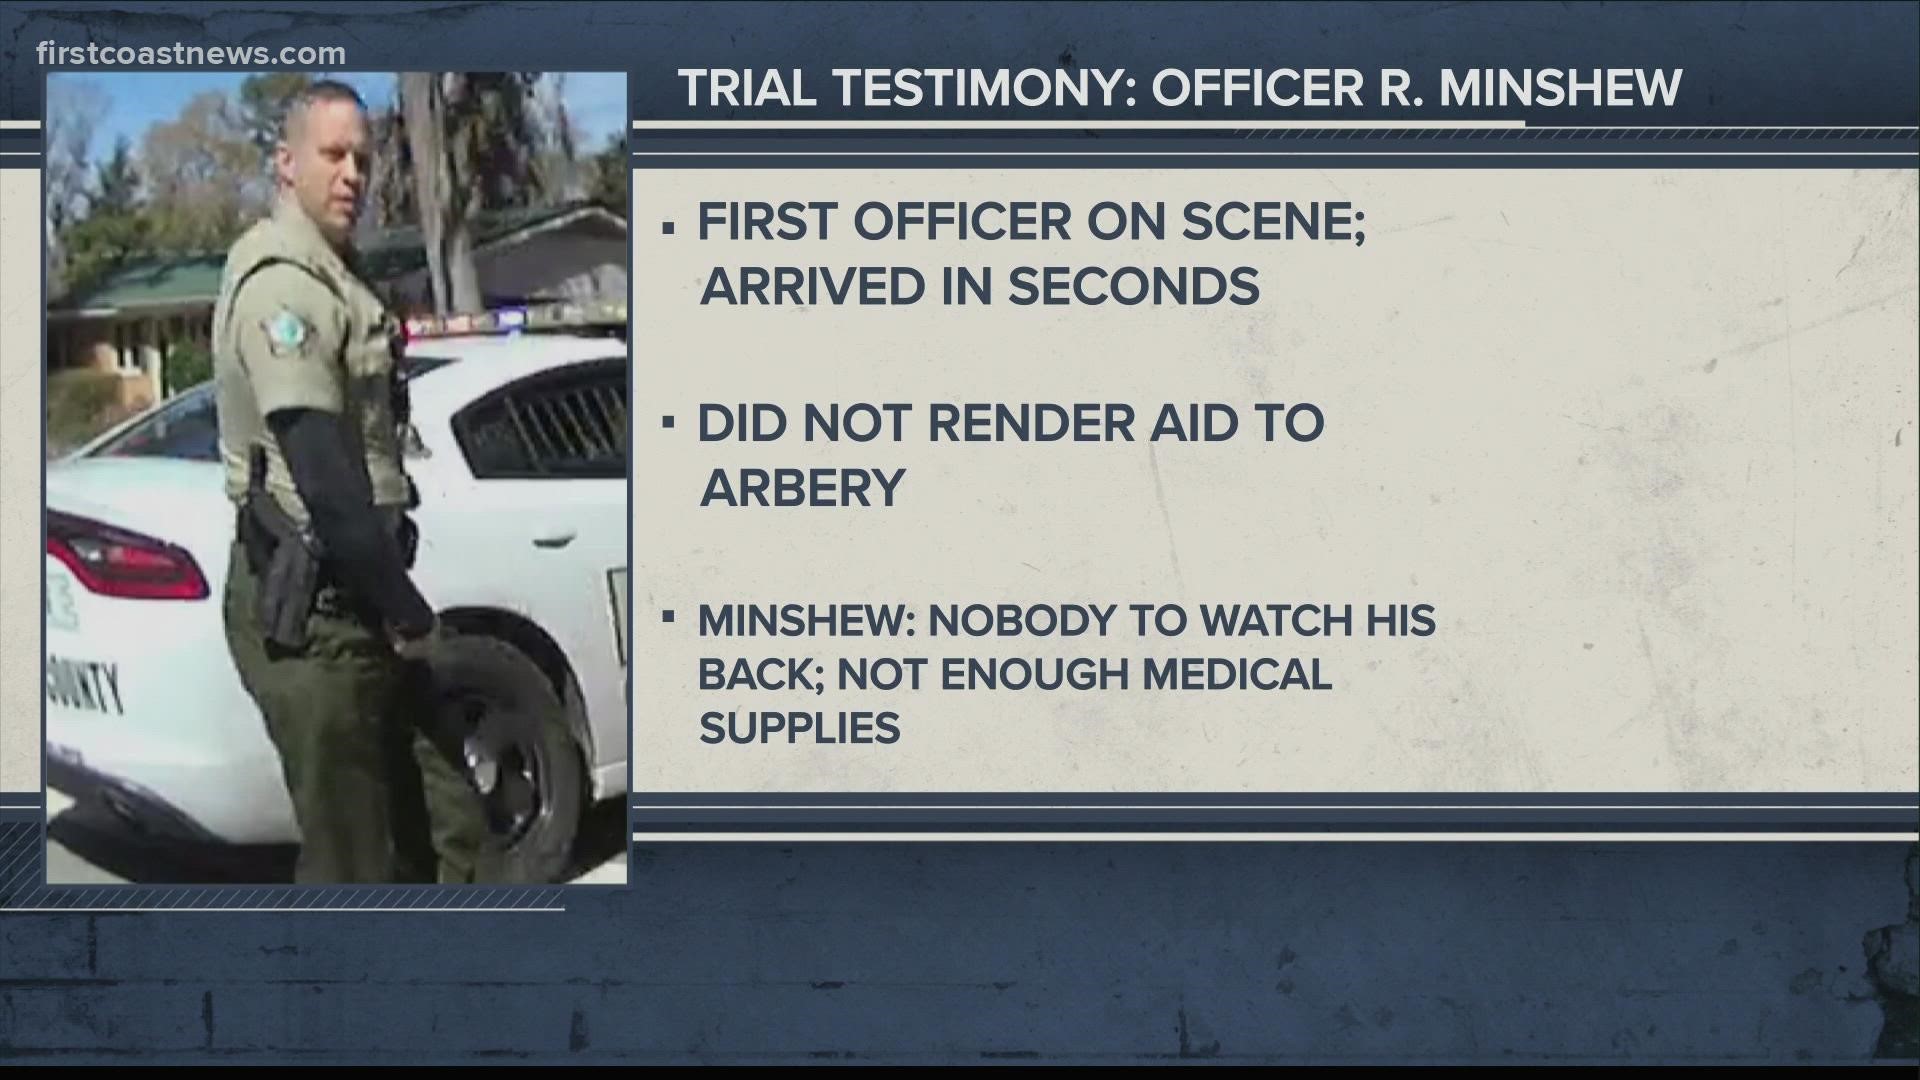 The officer said he did not render aid to Arbery because he did not have another officer to 'watch his back' and did not have proper medical equipment to give aid.